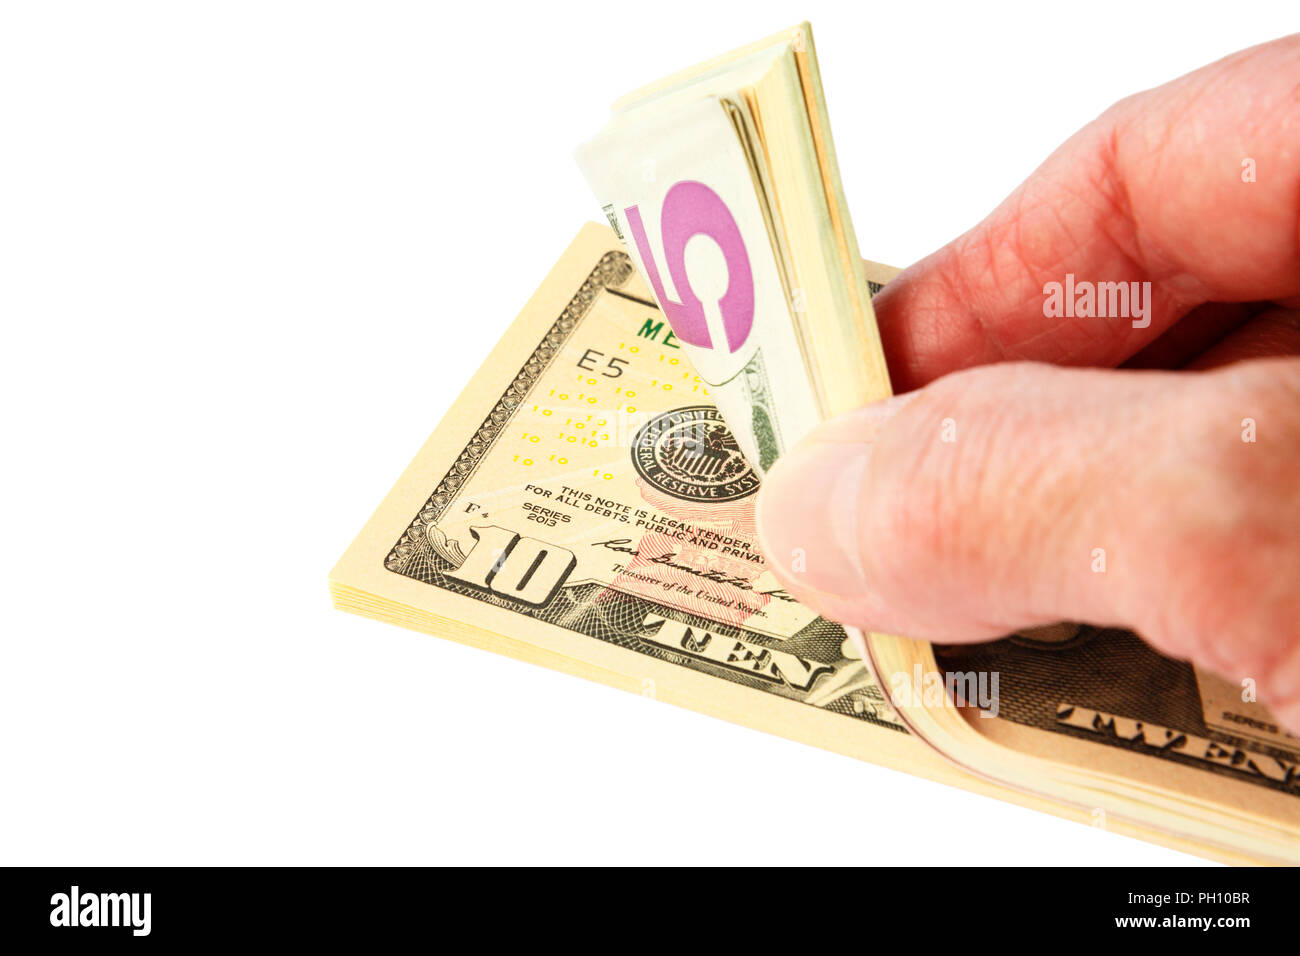 A senior person's hand counting a pile wodge of American currency money in US dollars dollar bills notes $ cash isolated on a white background. USA Stock Photo